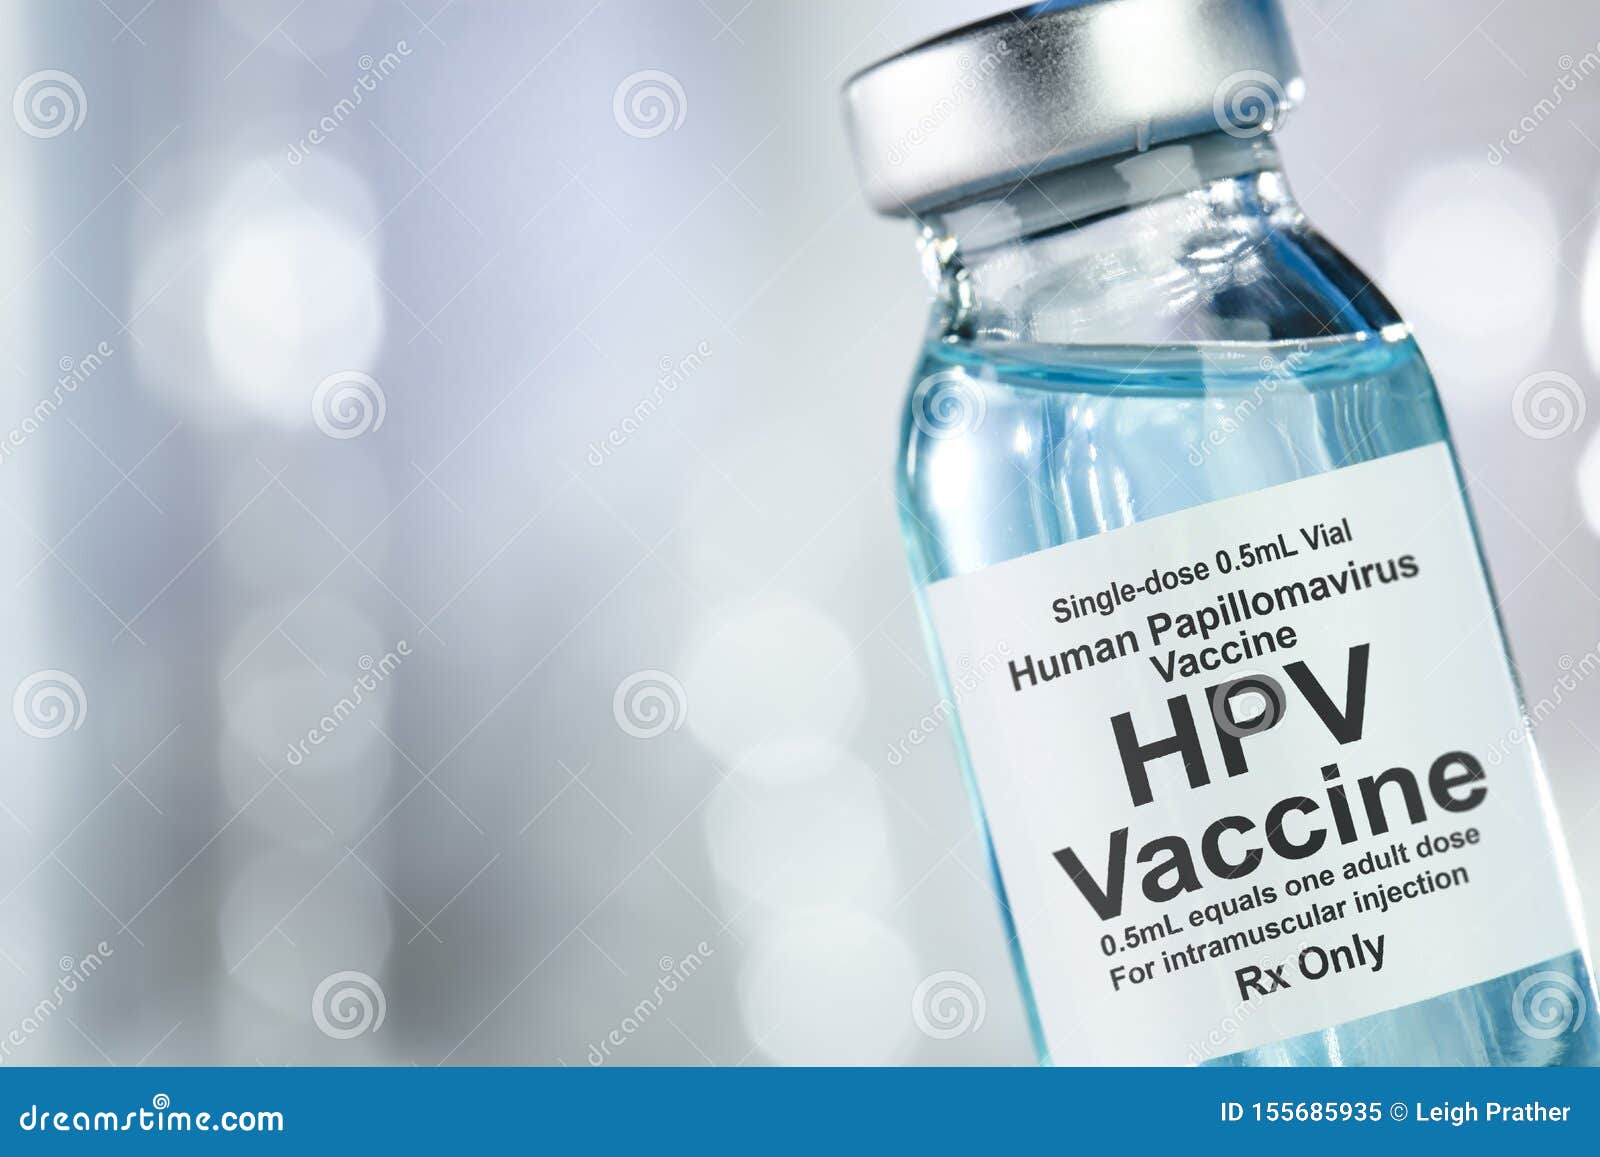 drug vial with hpv vaccine